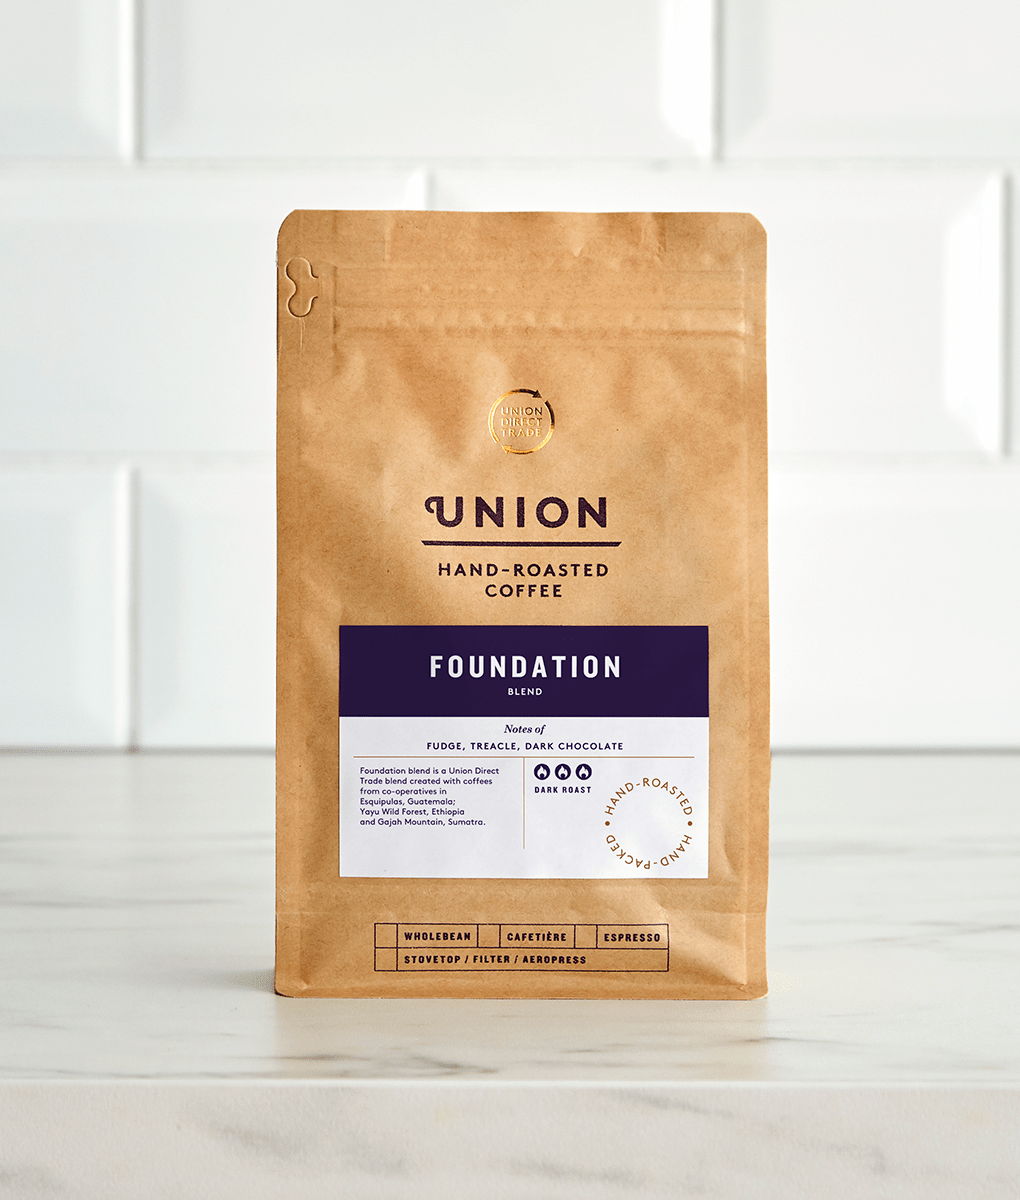 Foundation Blend, Union Coffee Bag,Wholebean,Cafetiere,Filter,Espresso,200g,1kg